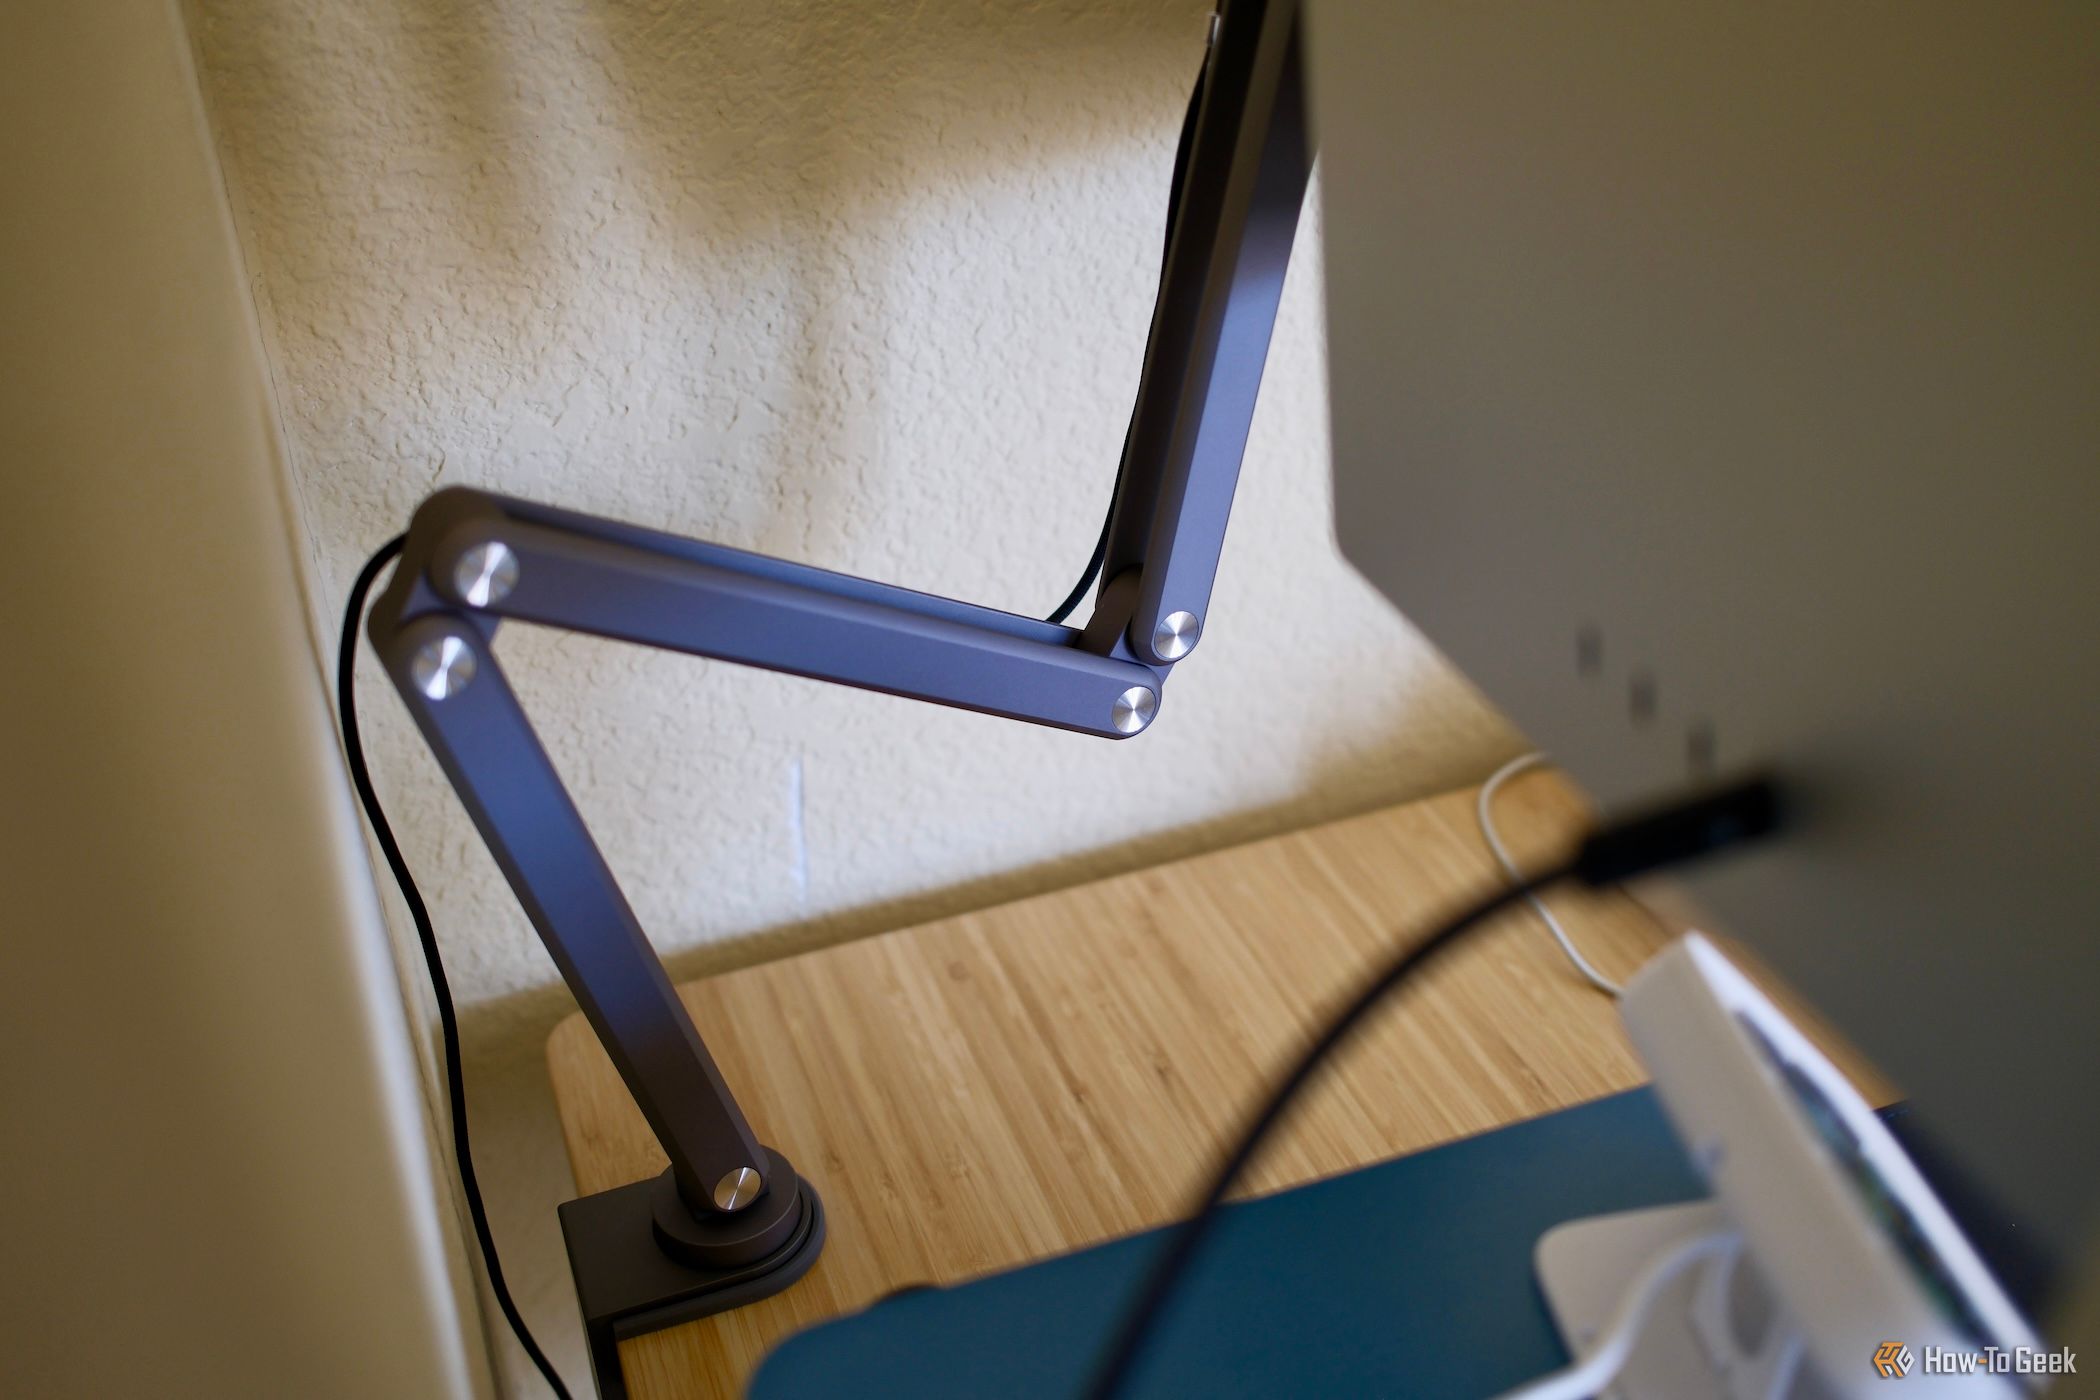 close up view of the Kuxiu X36 Pro Max iPad Stand